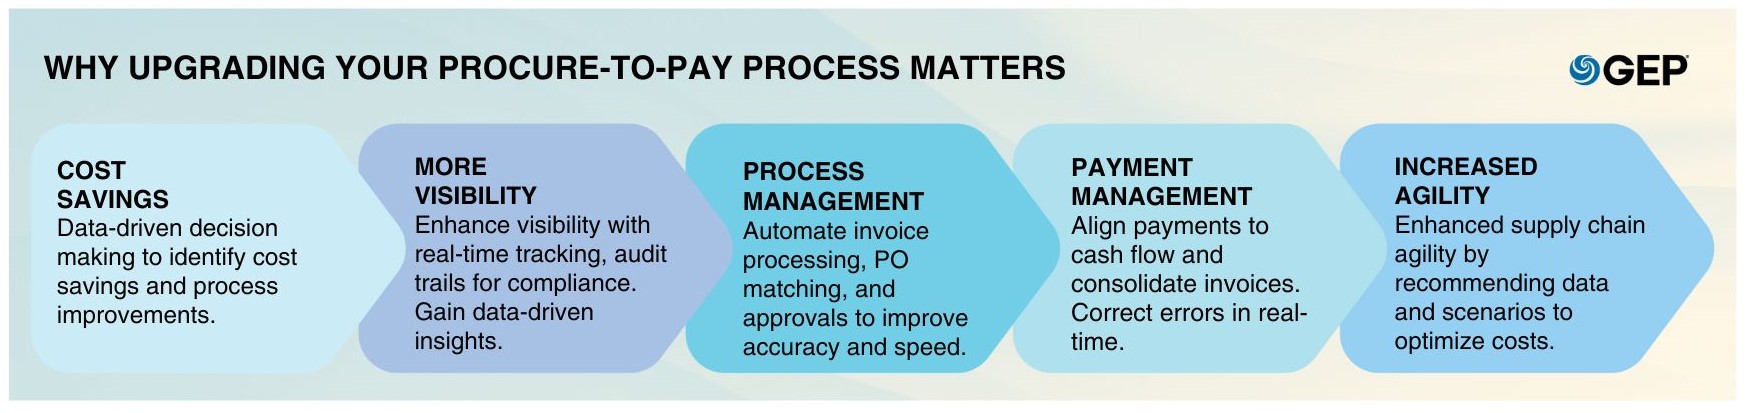 why-upgrading-your-procure-to-pay-process-matters